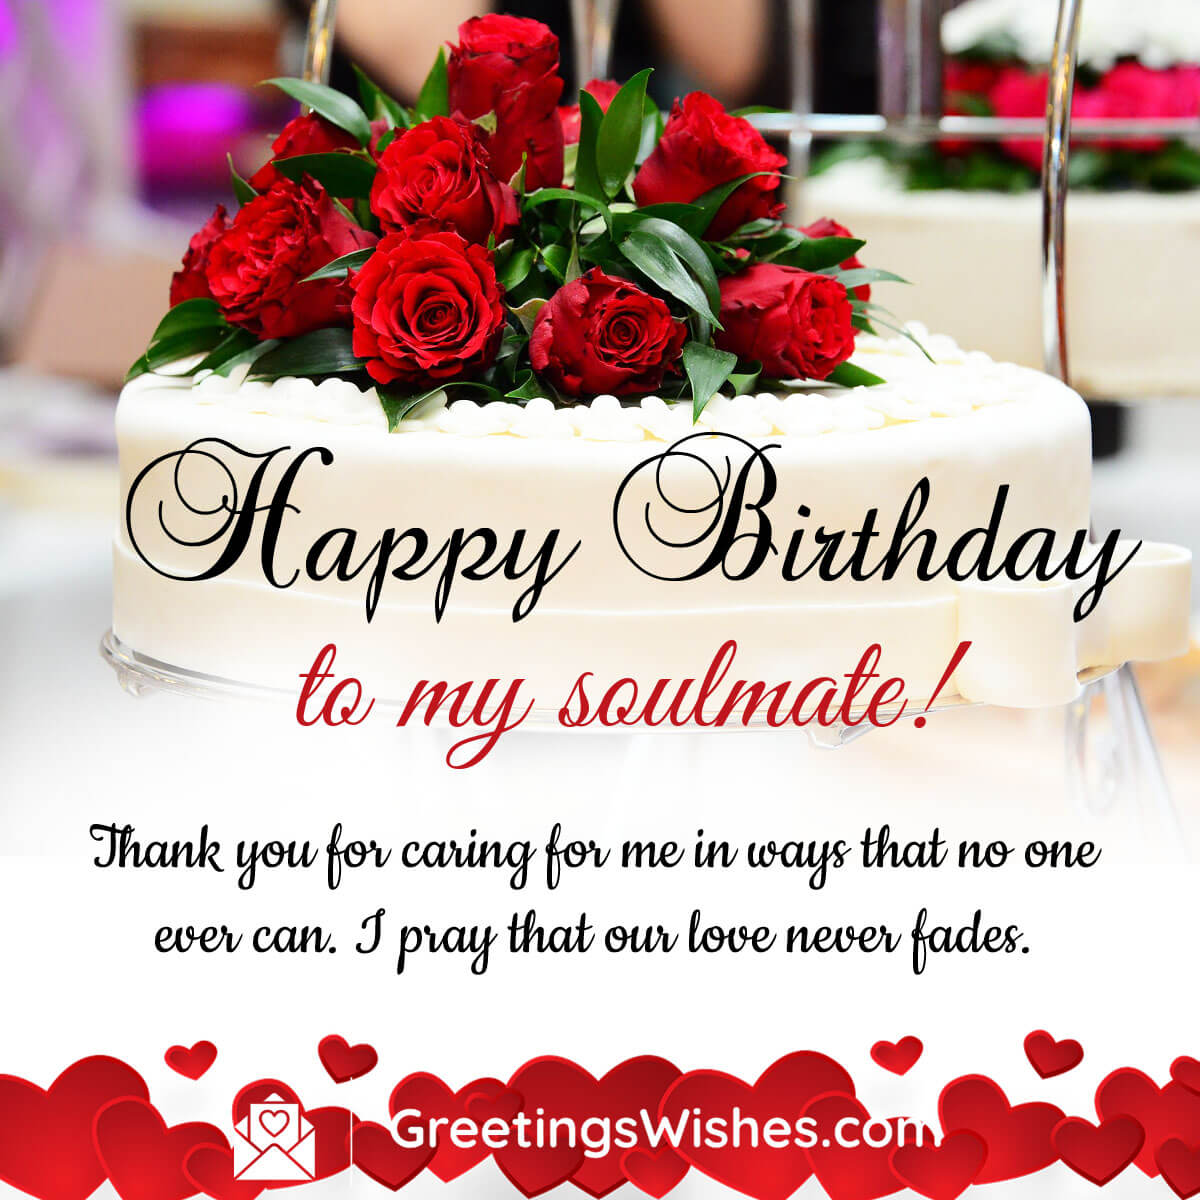 Romantic Birthday Wishes Greetings Wishes